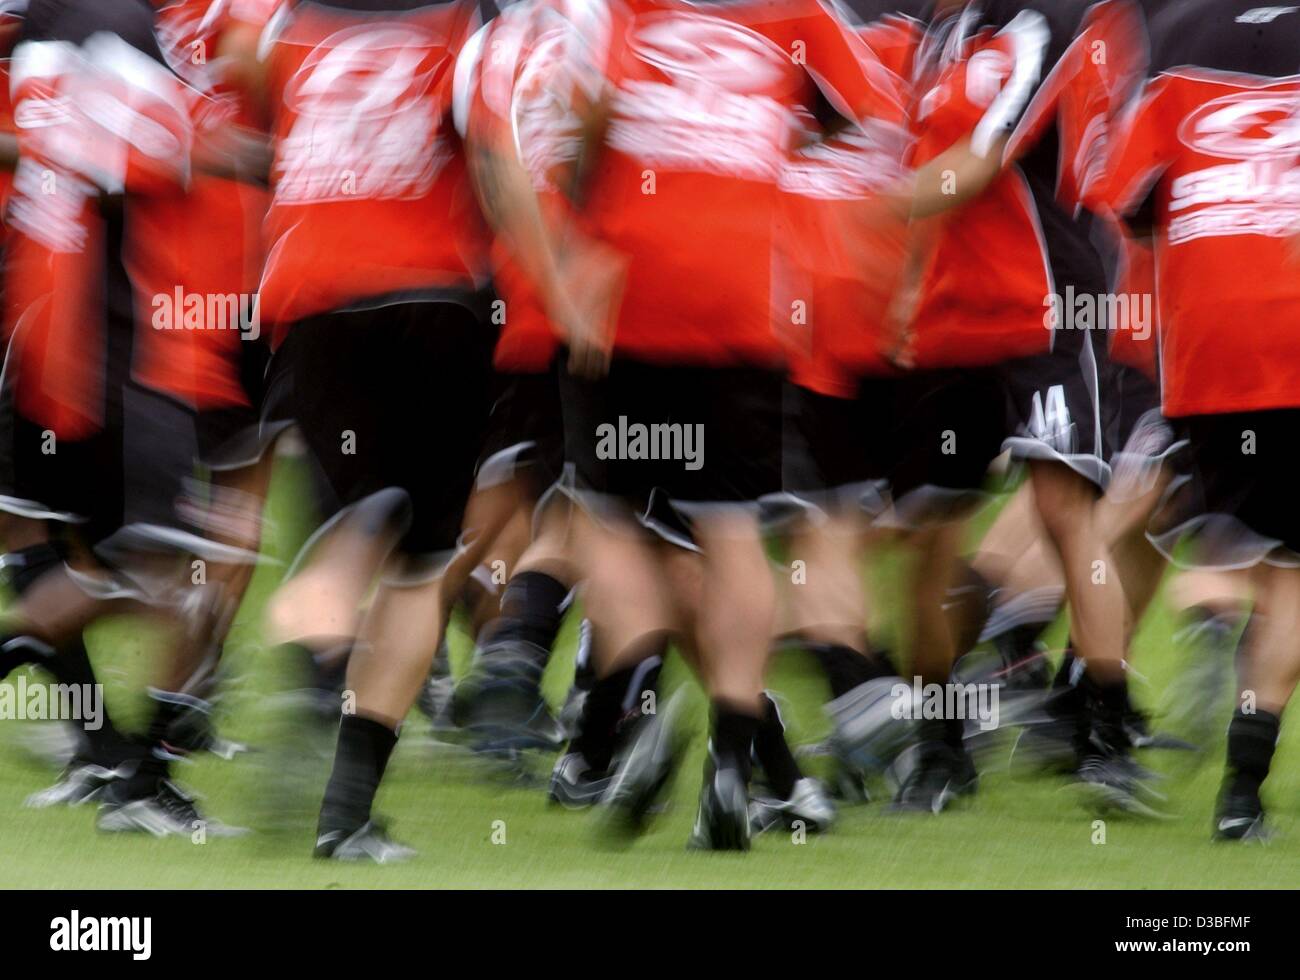 (dpa) - The players of the German soccer club 1st FC Cologne exercise on the pitch during a trainings session in Cologne, Germany, 26 June 2003 (intended effect through long-term exposure). Cologne managed by the end of the last Bundesliga season to ascend to the German premier league and has booste Stock Photo